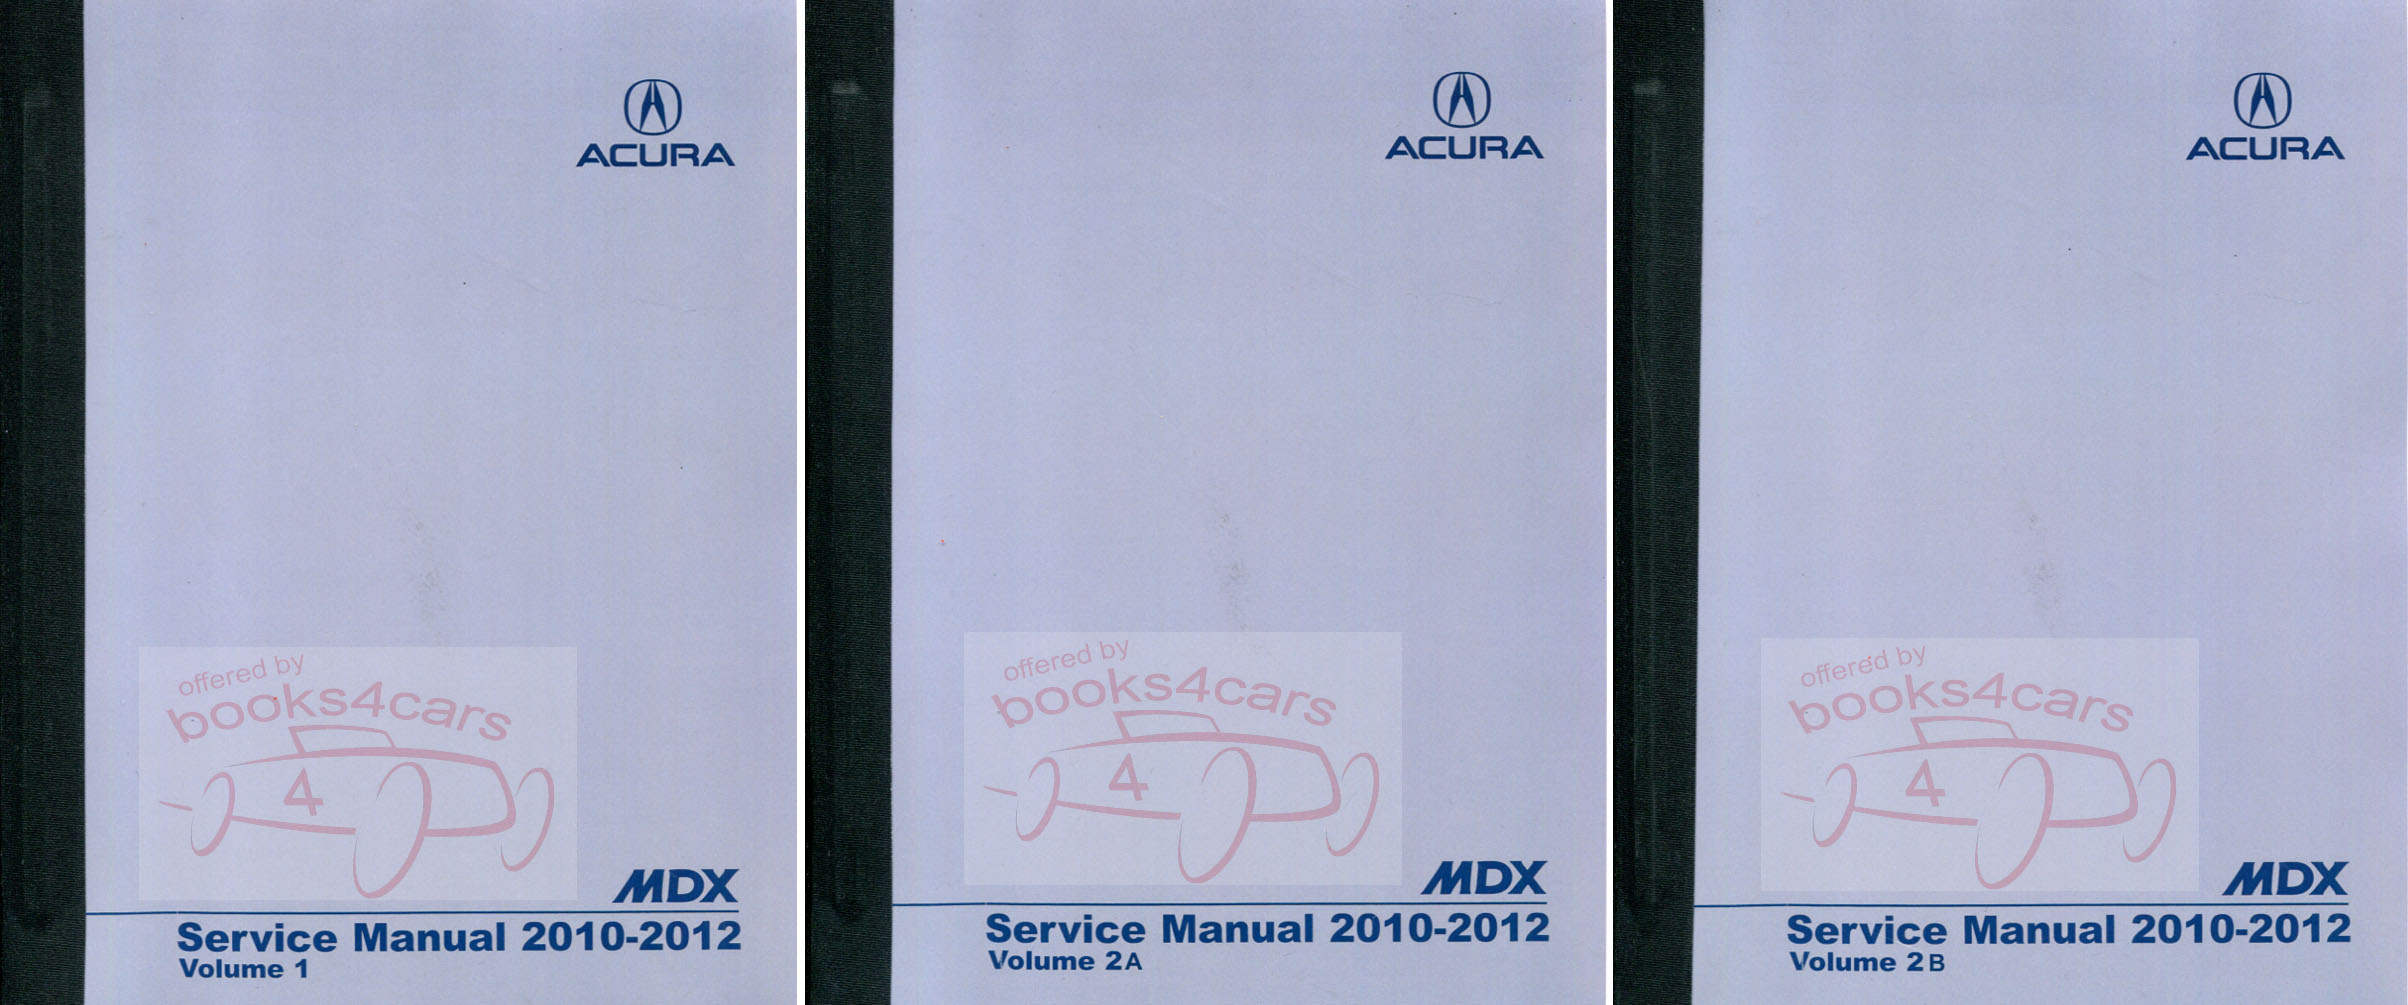 2010-2012 MDX Shop Service Repair Manual by Acura